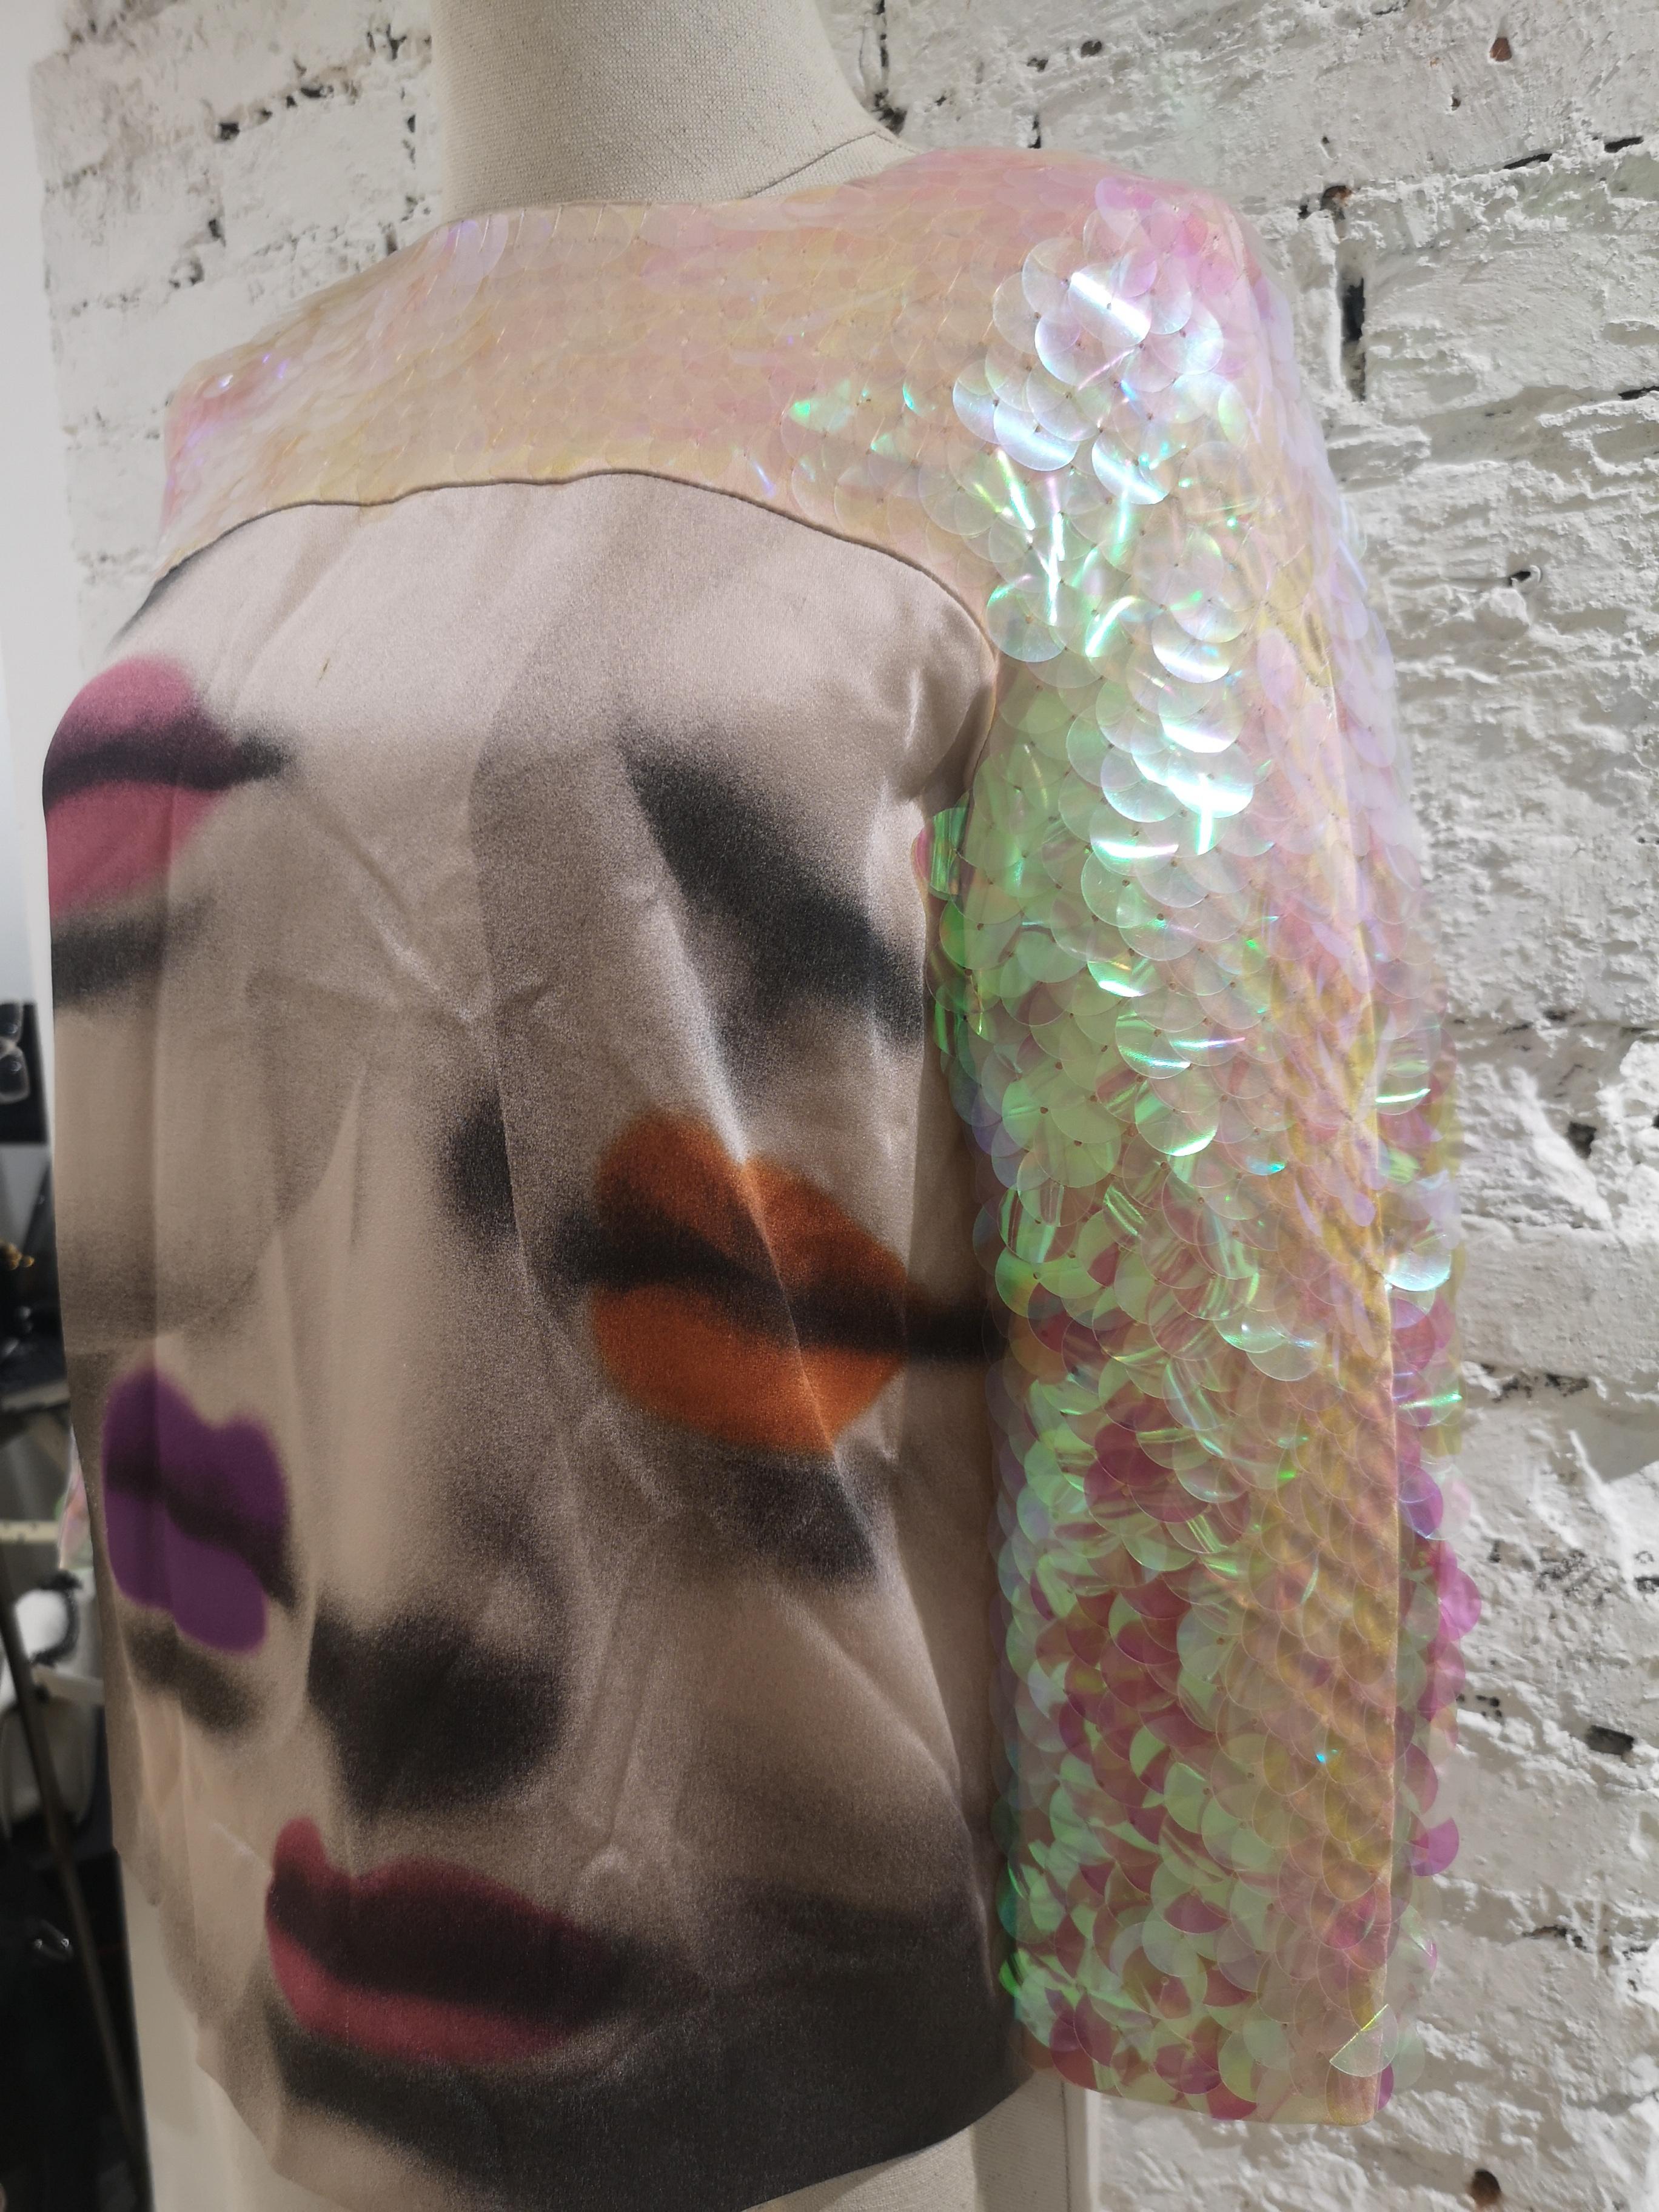 Moschino silk sequins mouth shirt
size m
total lebght 54 cm
shoulder to hem 50 cm
check pics carefully , some signs of use